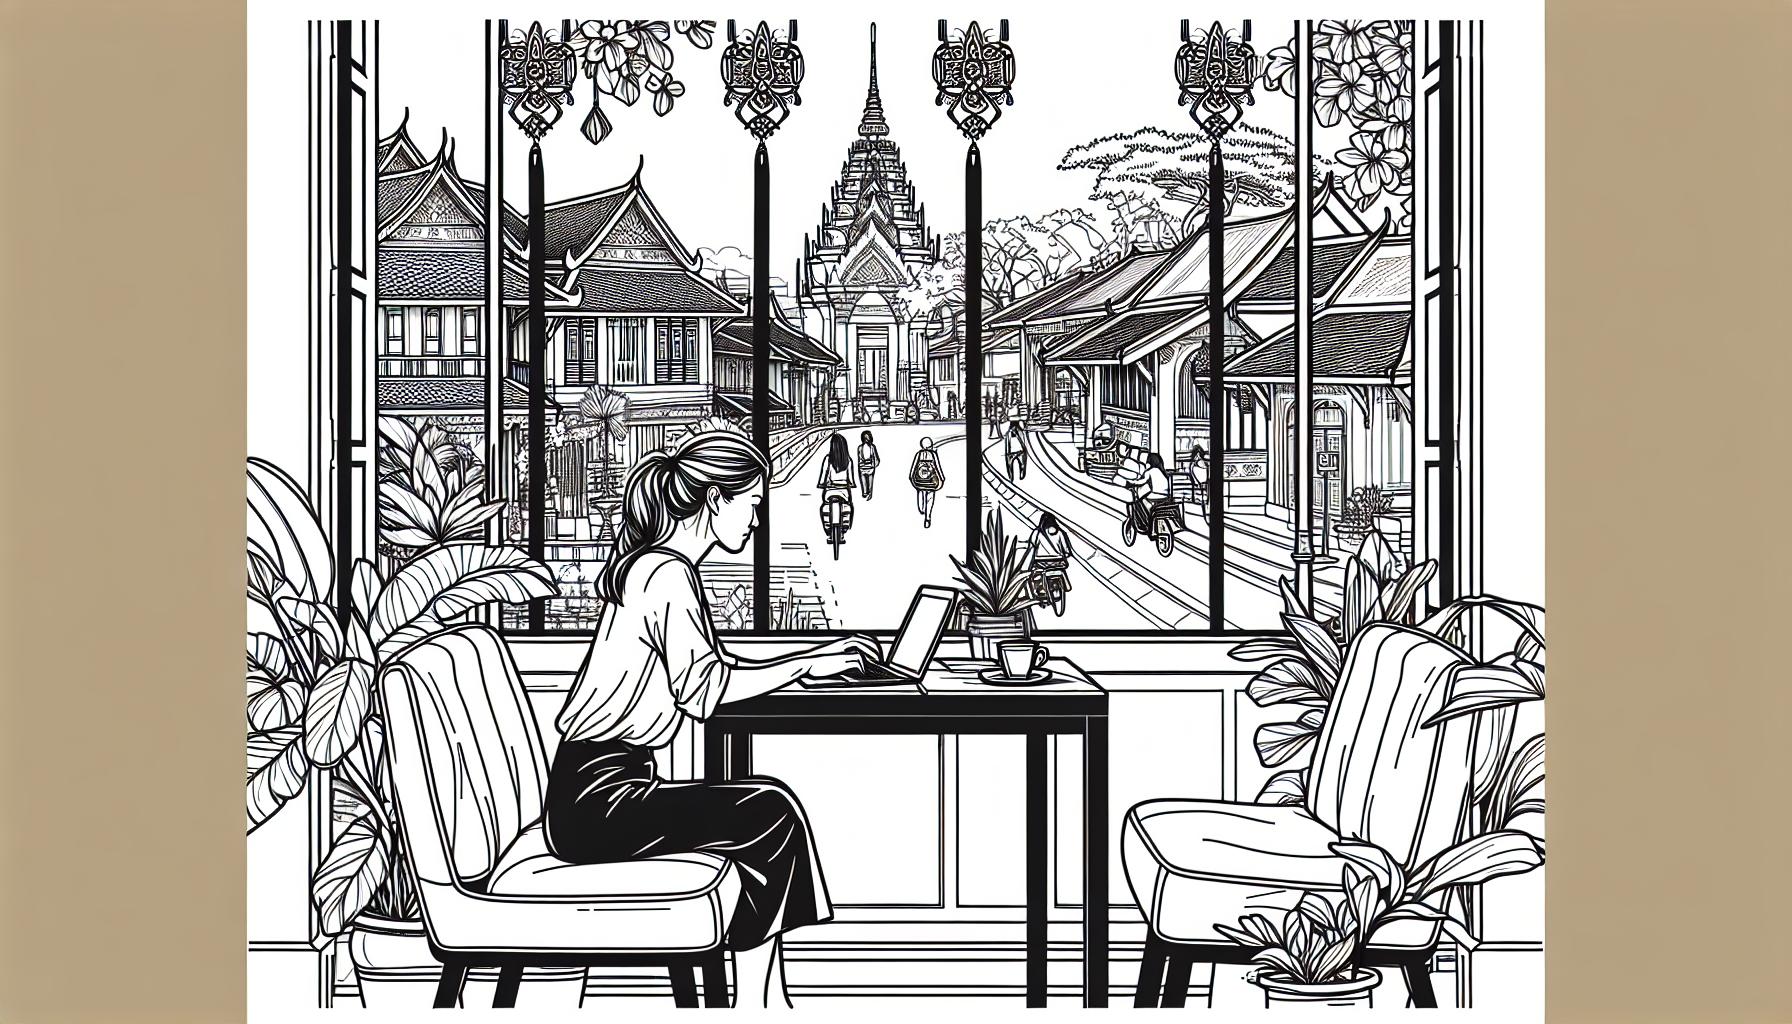 Destinations Top 7 Best Asian Countries for Digital Nomads ReallyRemoteWorker Discover Asia's top destinations for digital nomads in our insider guide; navigating Thailand, Vietnam, Malaysia, Bali, Taiwan, Singapore, and South Korea's unique attractions and lifestyle benefits. Equip yourself with the knowledge to find the perfect work-life balance abroad.